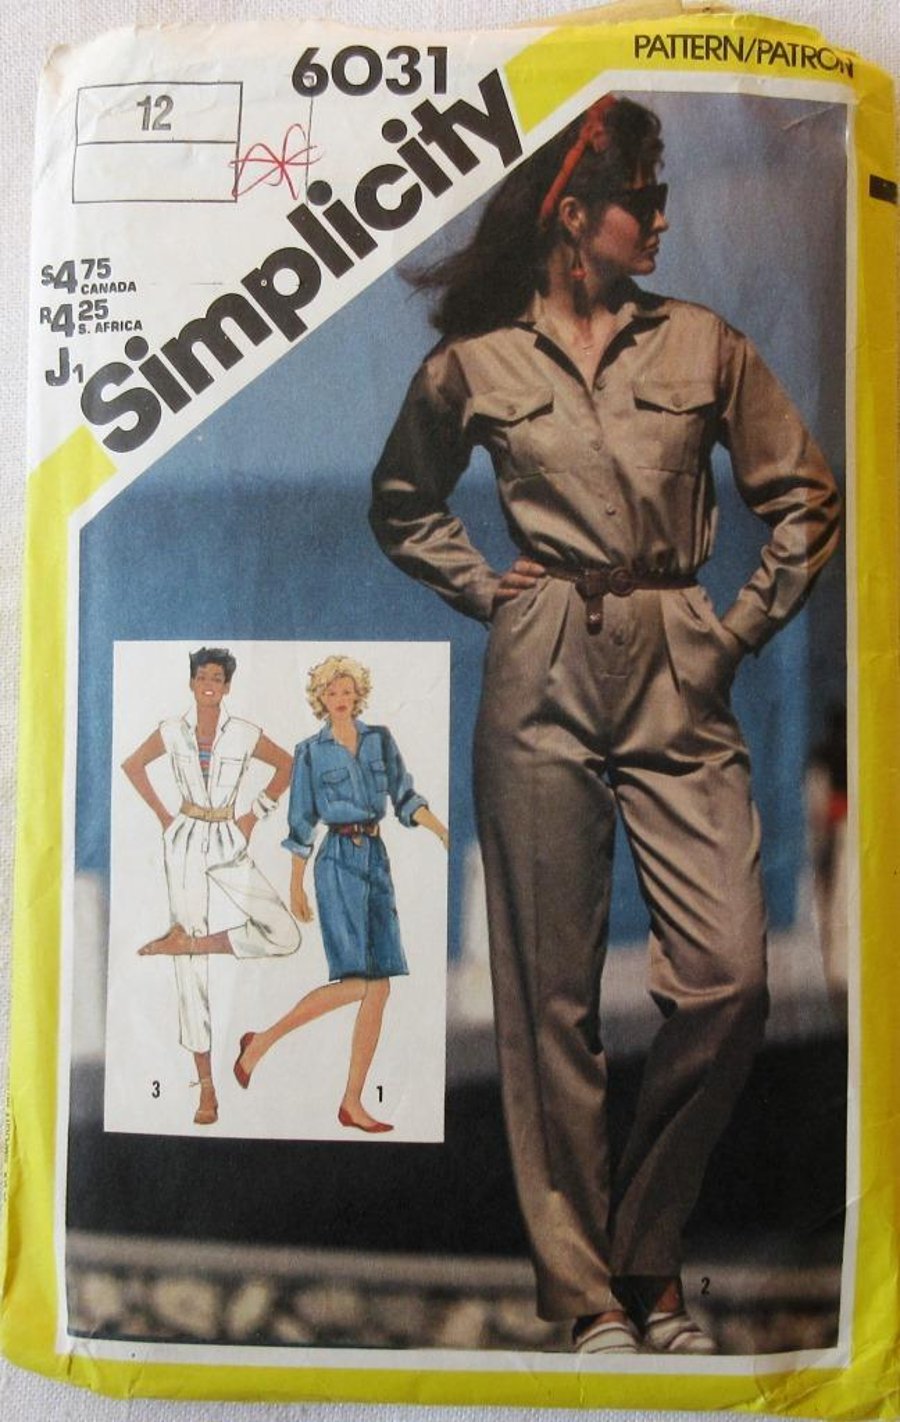 A sewing pattern for a misses' jumpsuit in 2 lengths and dress in size 12